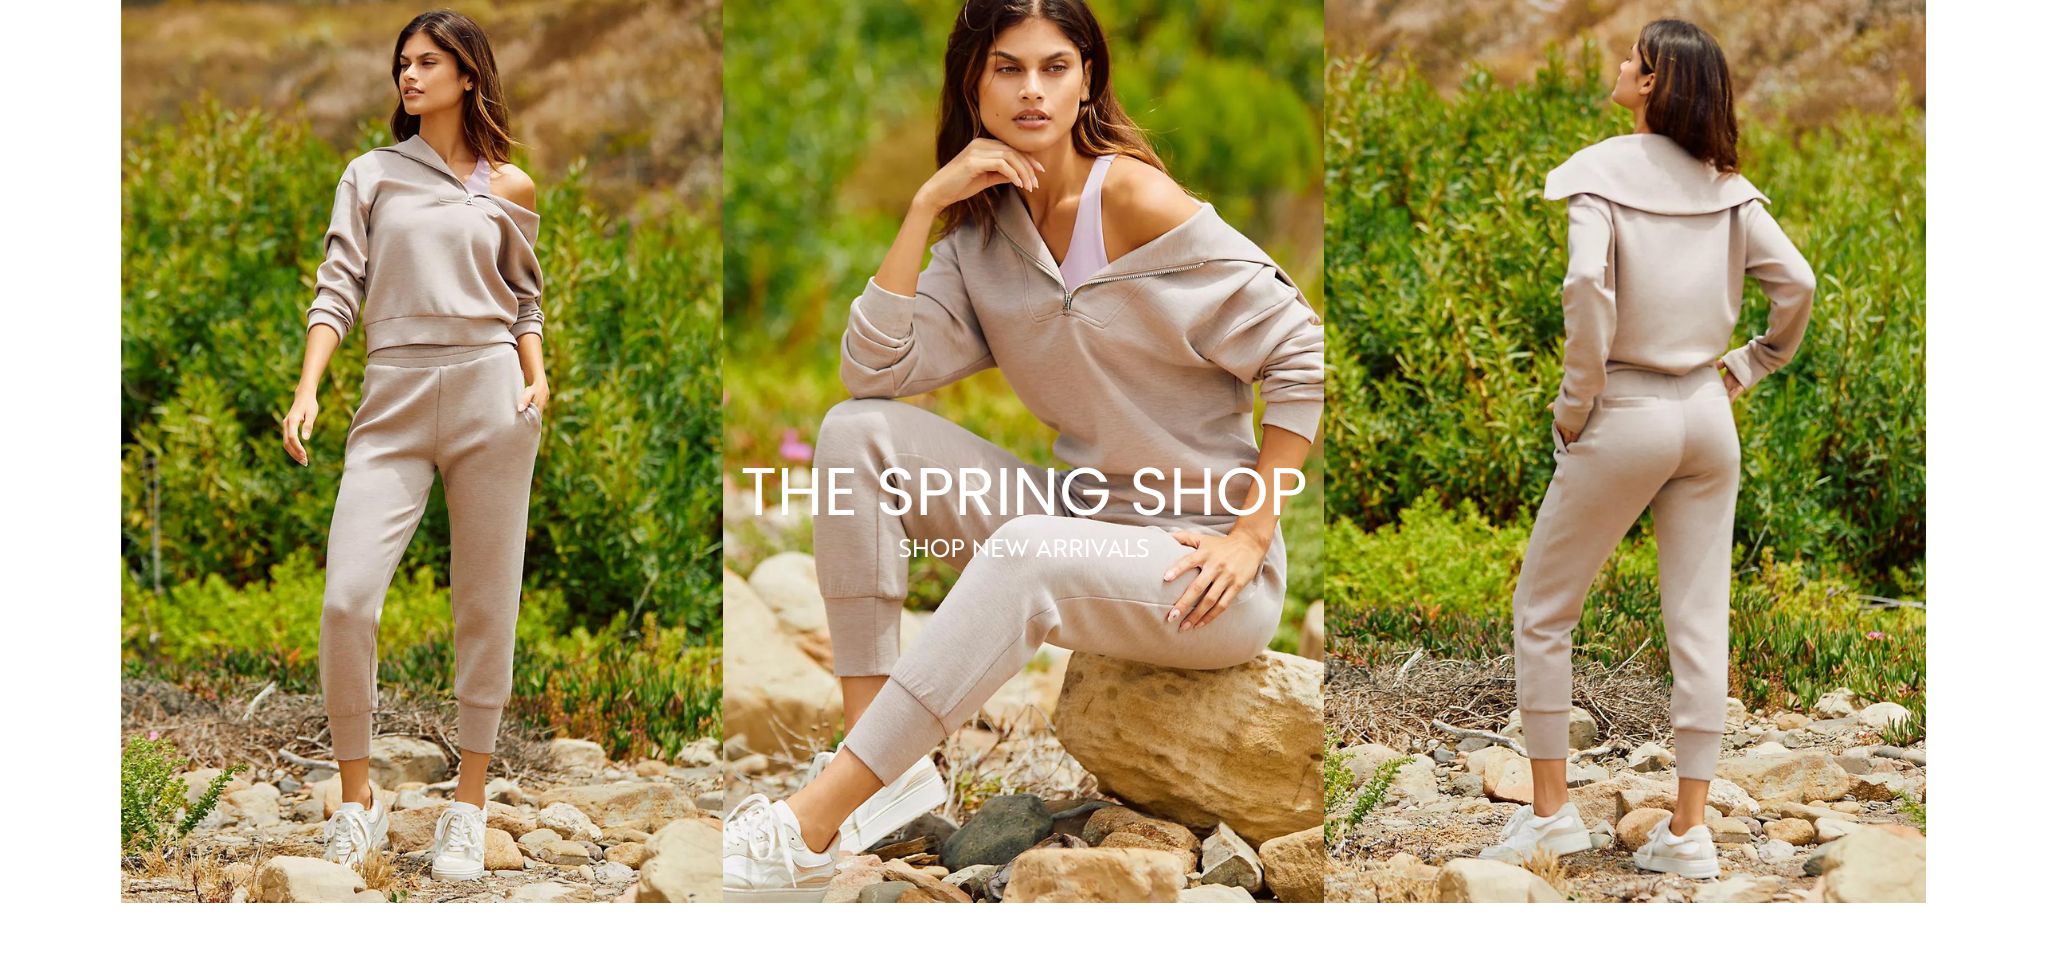 The Spring Shop New Arrivals Featuring a Collage of Model Wearing the Varley Hawley Half-Zip Sweat and Slim Cuff Pant in Taupe Marl